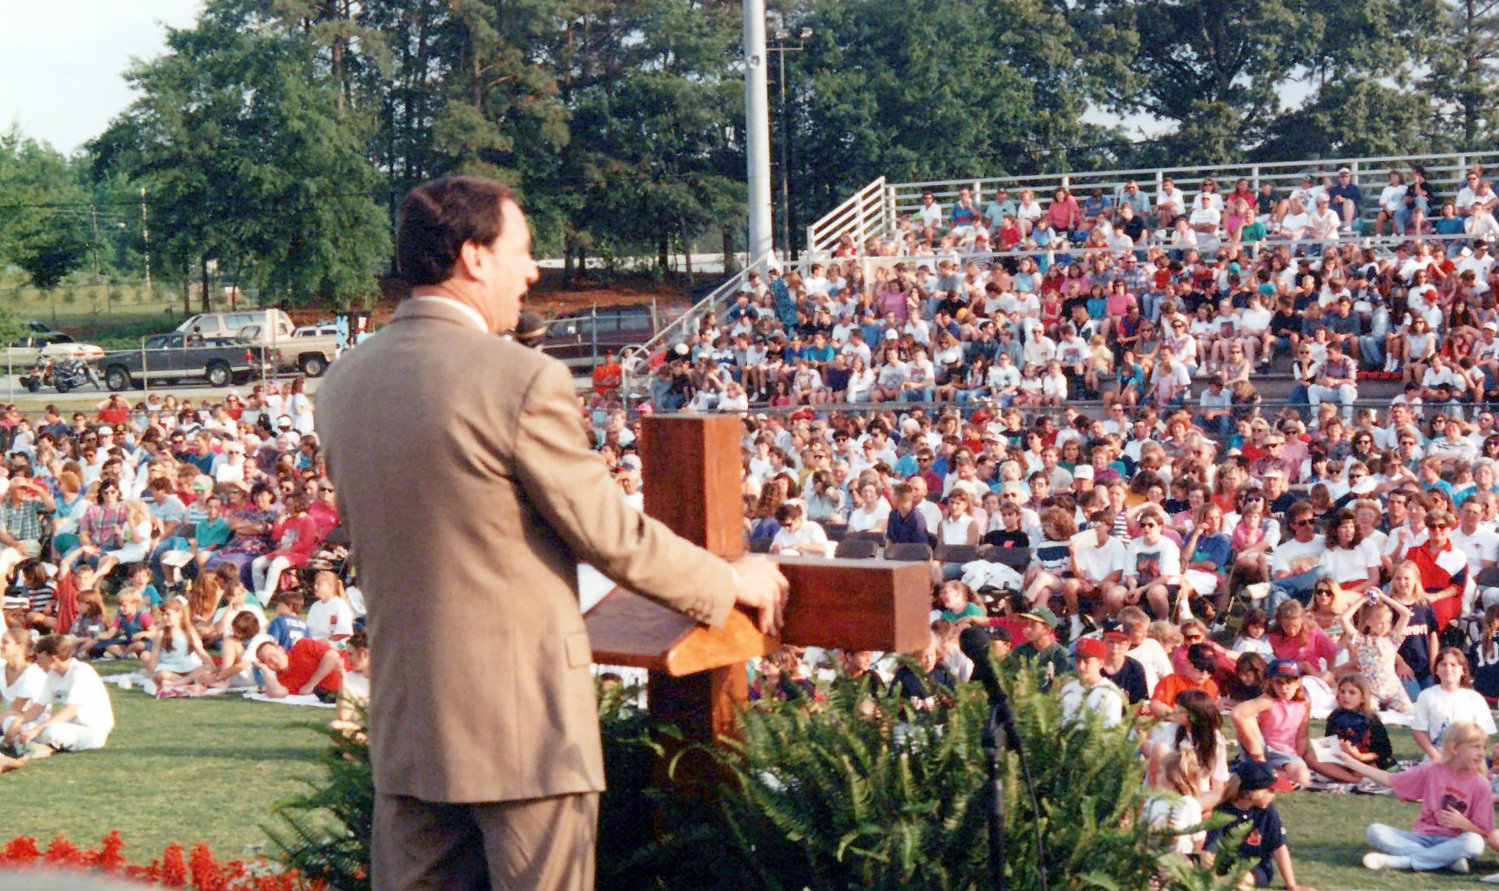 Pastor Larry Wynn preaches during a Starlight Crusade event in the 1990s at Hebron Baptist Church in Dacula, Ga. The church celebrated its 180th anniversary this past Sunday. (Photo/Hebron Baptist Church)